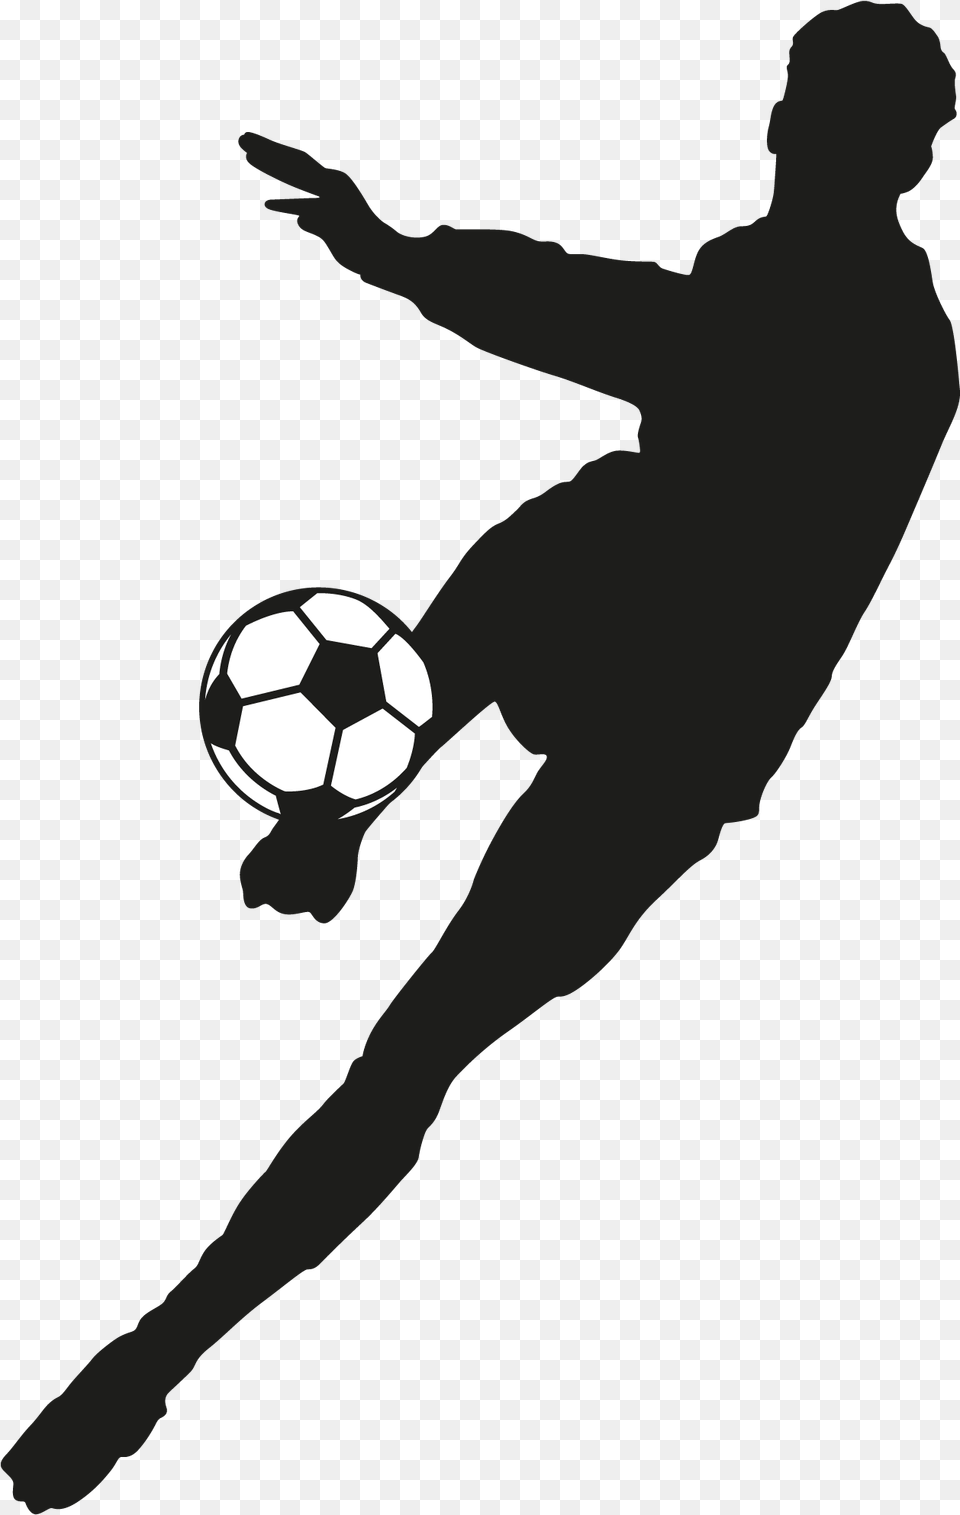 Football Player Silhouette Silhouette Football Players, Ball, Soccer, Soccer Ball, Sport Free Png Download